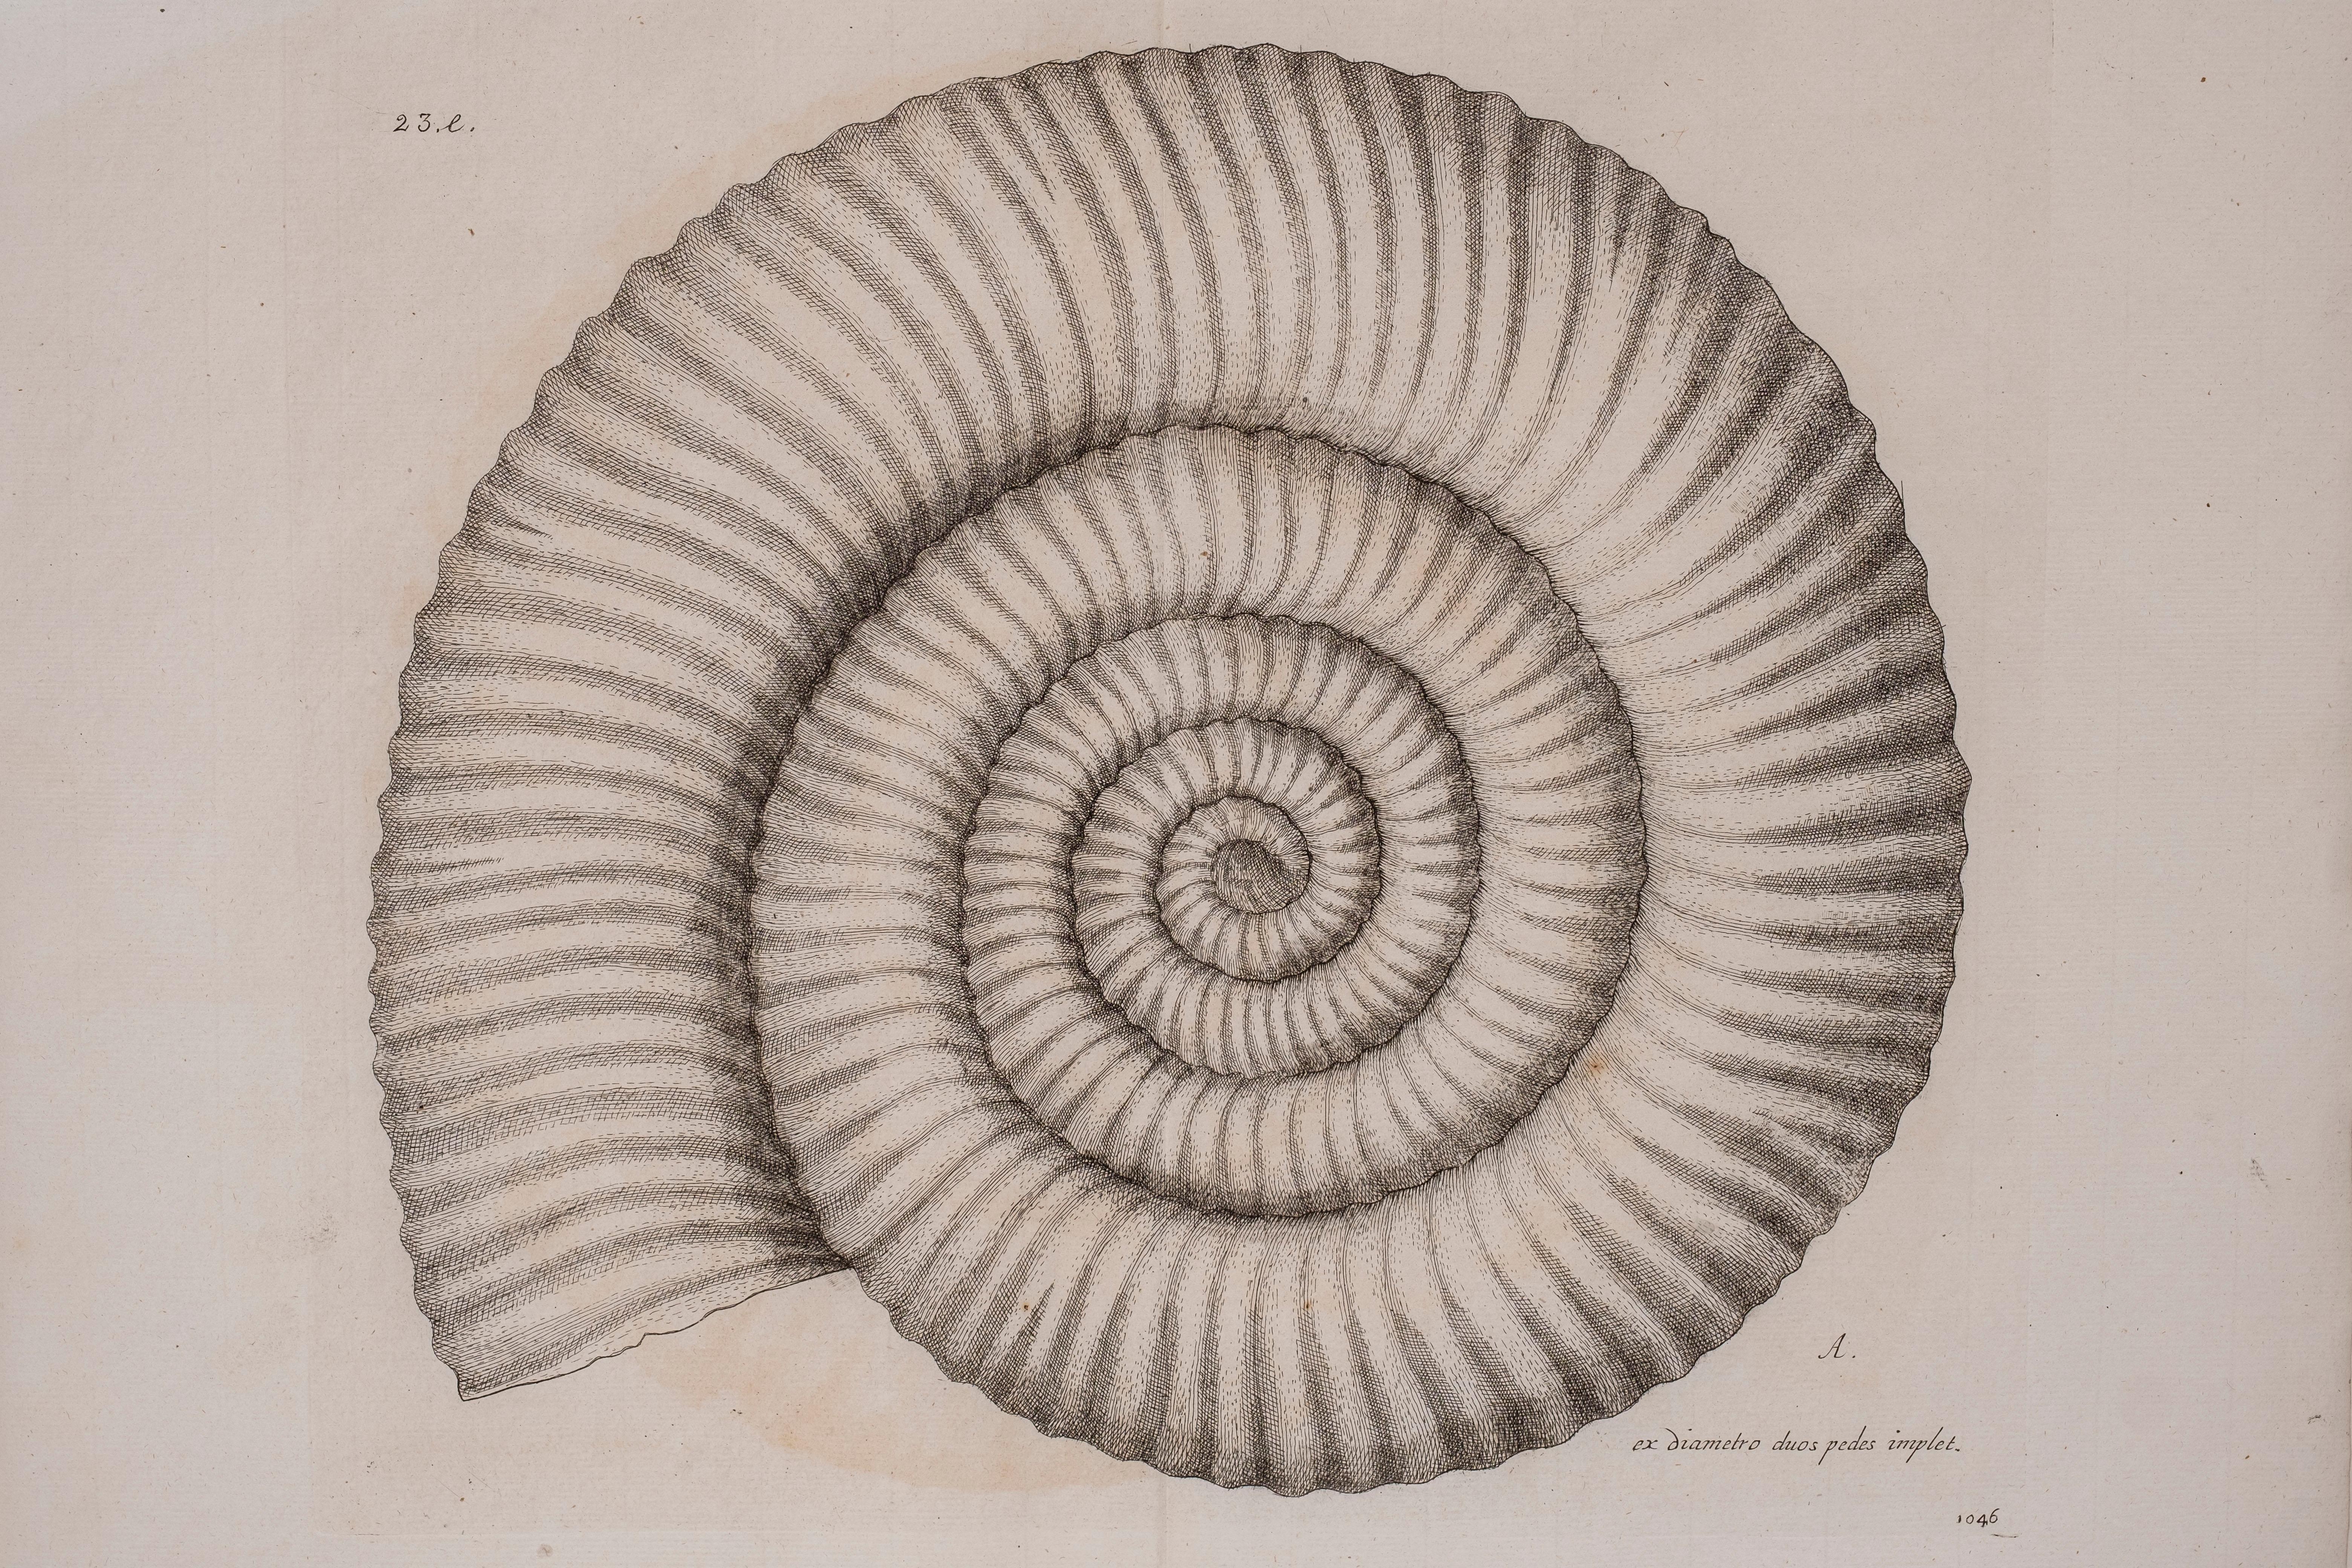 
 Framed large black and white engraving of sea shells by Lister. This very rare copper engraving is from Martin Lister's work Historiae sive synopsis methodicae conchyliorum et tabulae anatomicarum. It was published in 1770 in Oxford by Clarendon